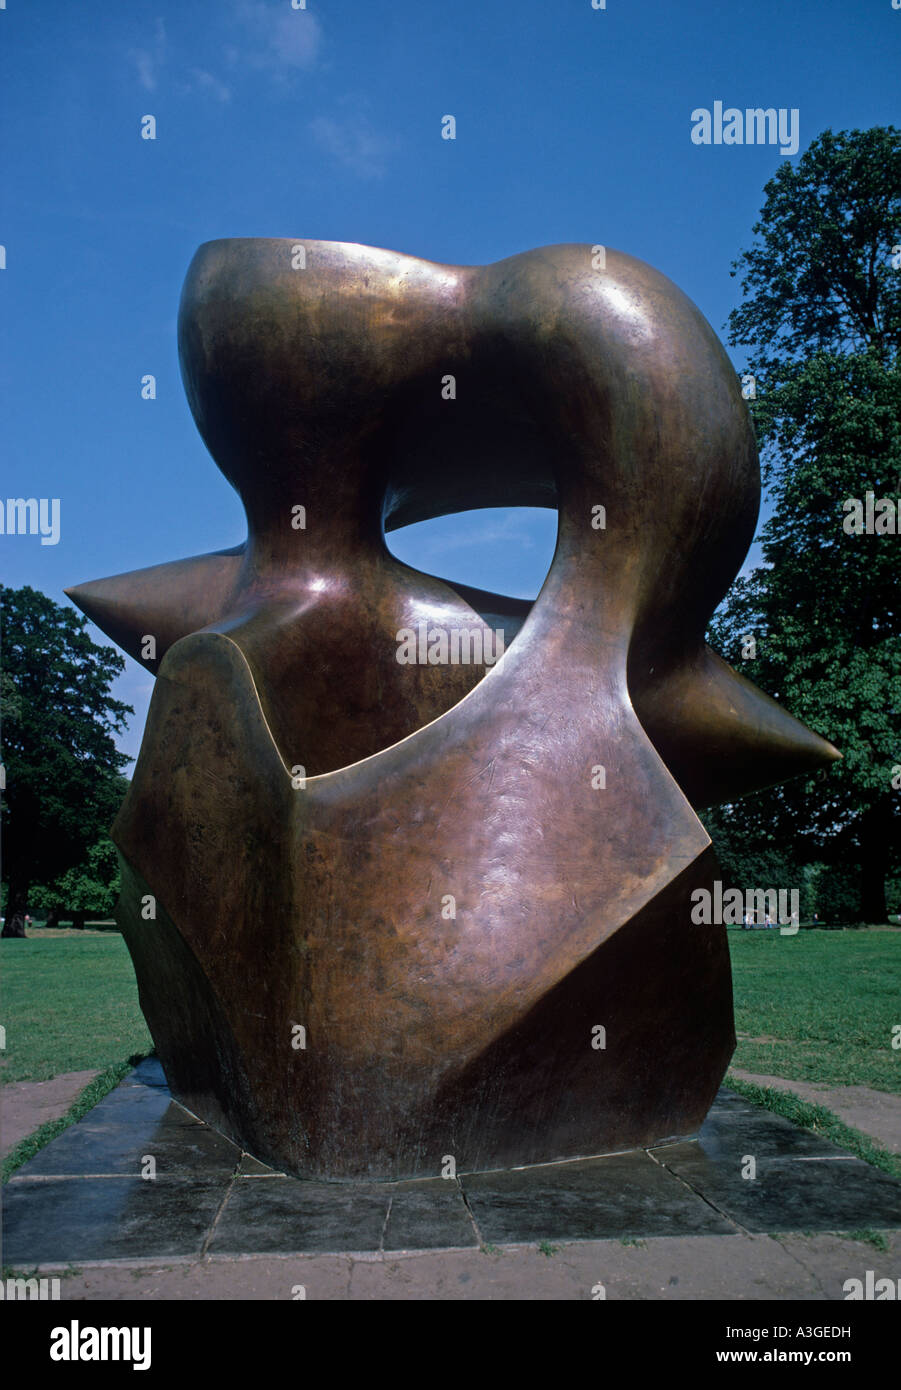 LARGE SPINDLE Henry Moore sculptures forming an open exhibition  in Kensington Gardens 1978 Stock Photo